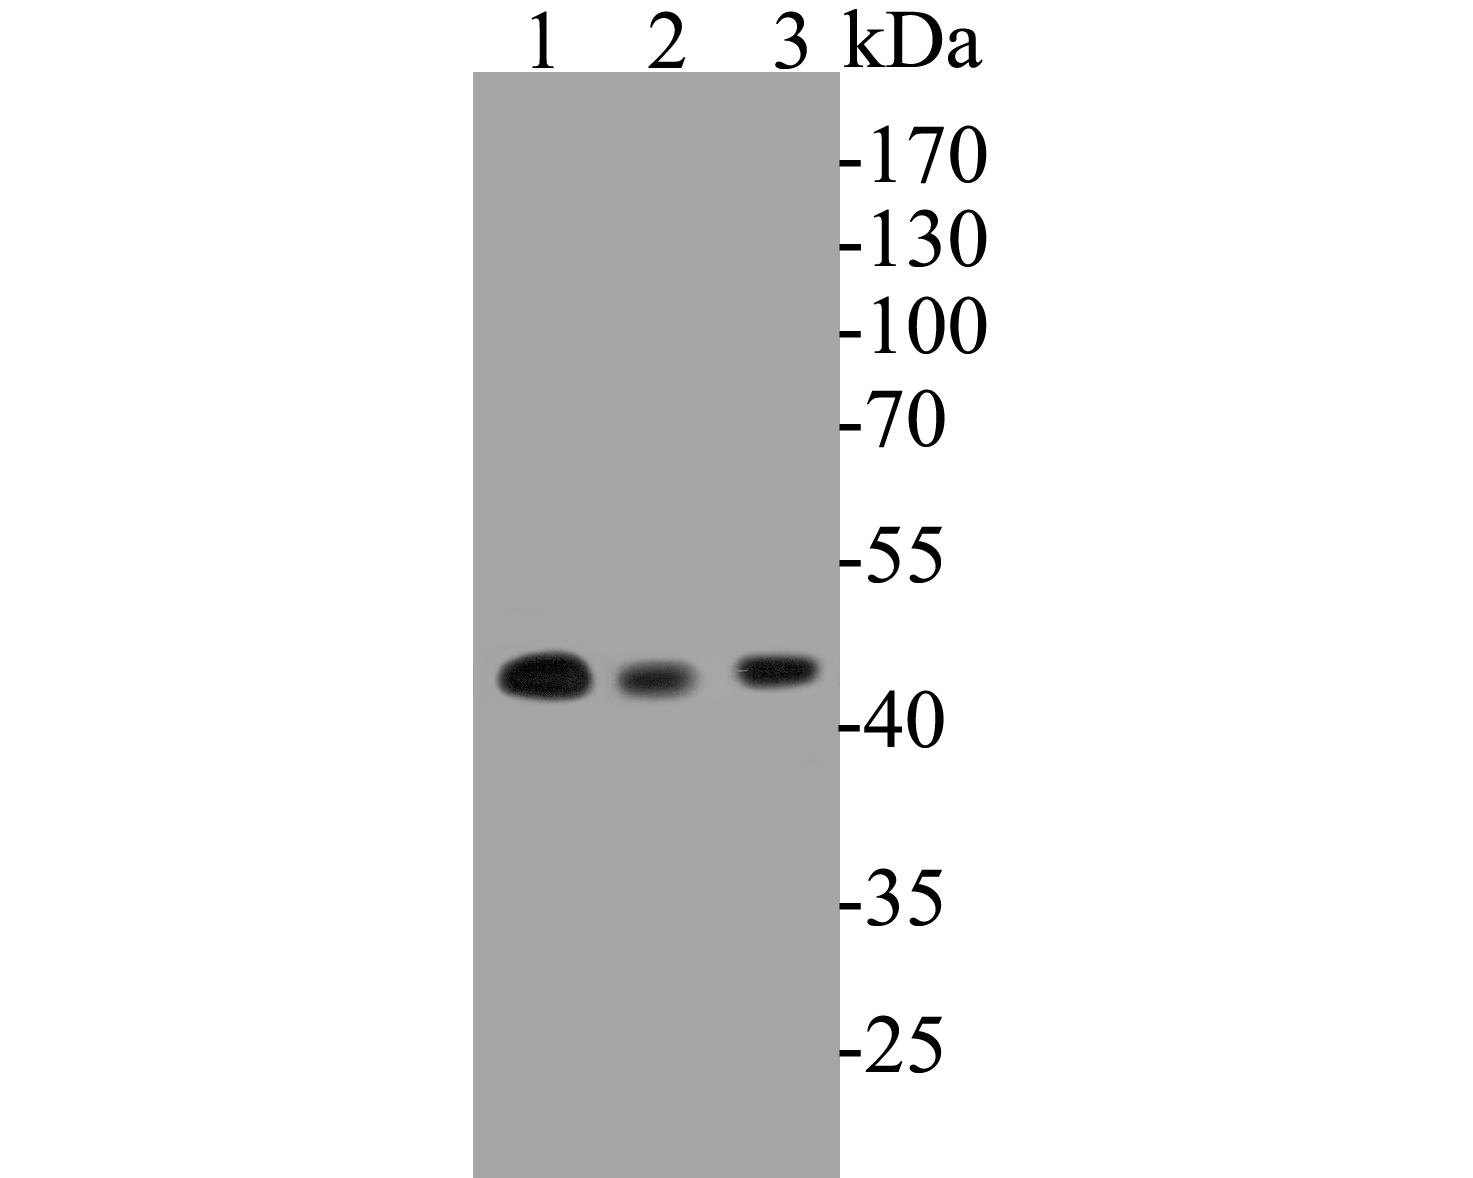 Western blot analysis of NUDC on different lysates. Proteins were transferred to a PVDF membrane and blocked with 5% BSA in PBS for 1 hour at room temperature. The primary antibody (ET7110-18, 1/500) was used in 5% BSA at room temperature for 2 hours. Goat Anti-Rabbit IgG - HRP Secondary Antibody (HA1001) at 1:5,000 dilution was used for 1 hour at room temperature.<br />
Positive control: <br />
Lane 1: K562 cell lysates<br />
Lane 2: PC-3M cell lysates<br />
Lane 3: U937 cell lysates